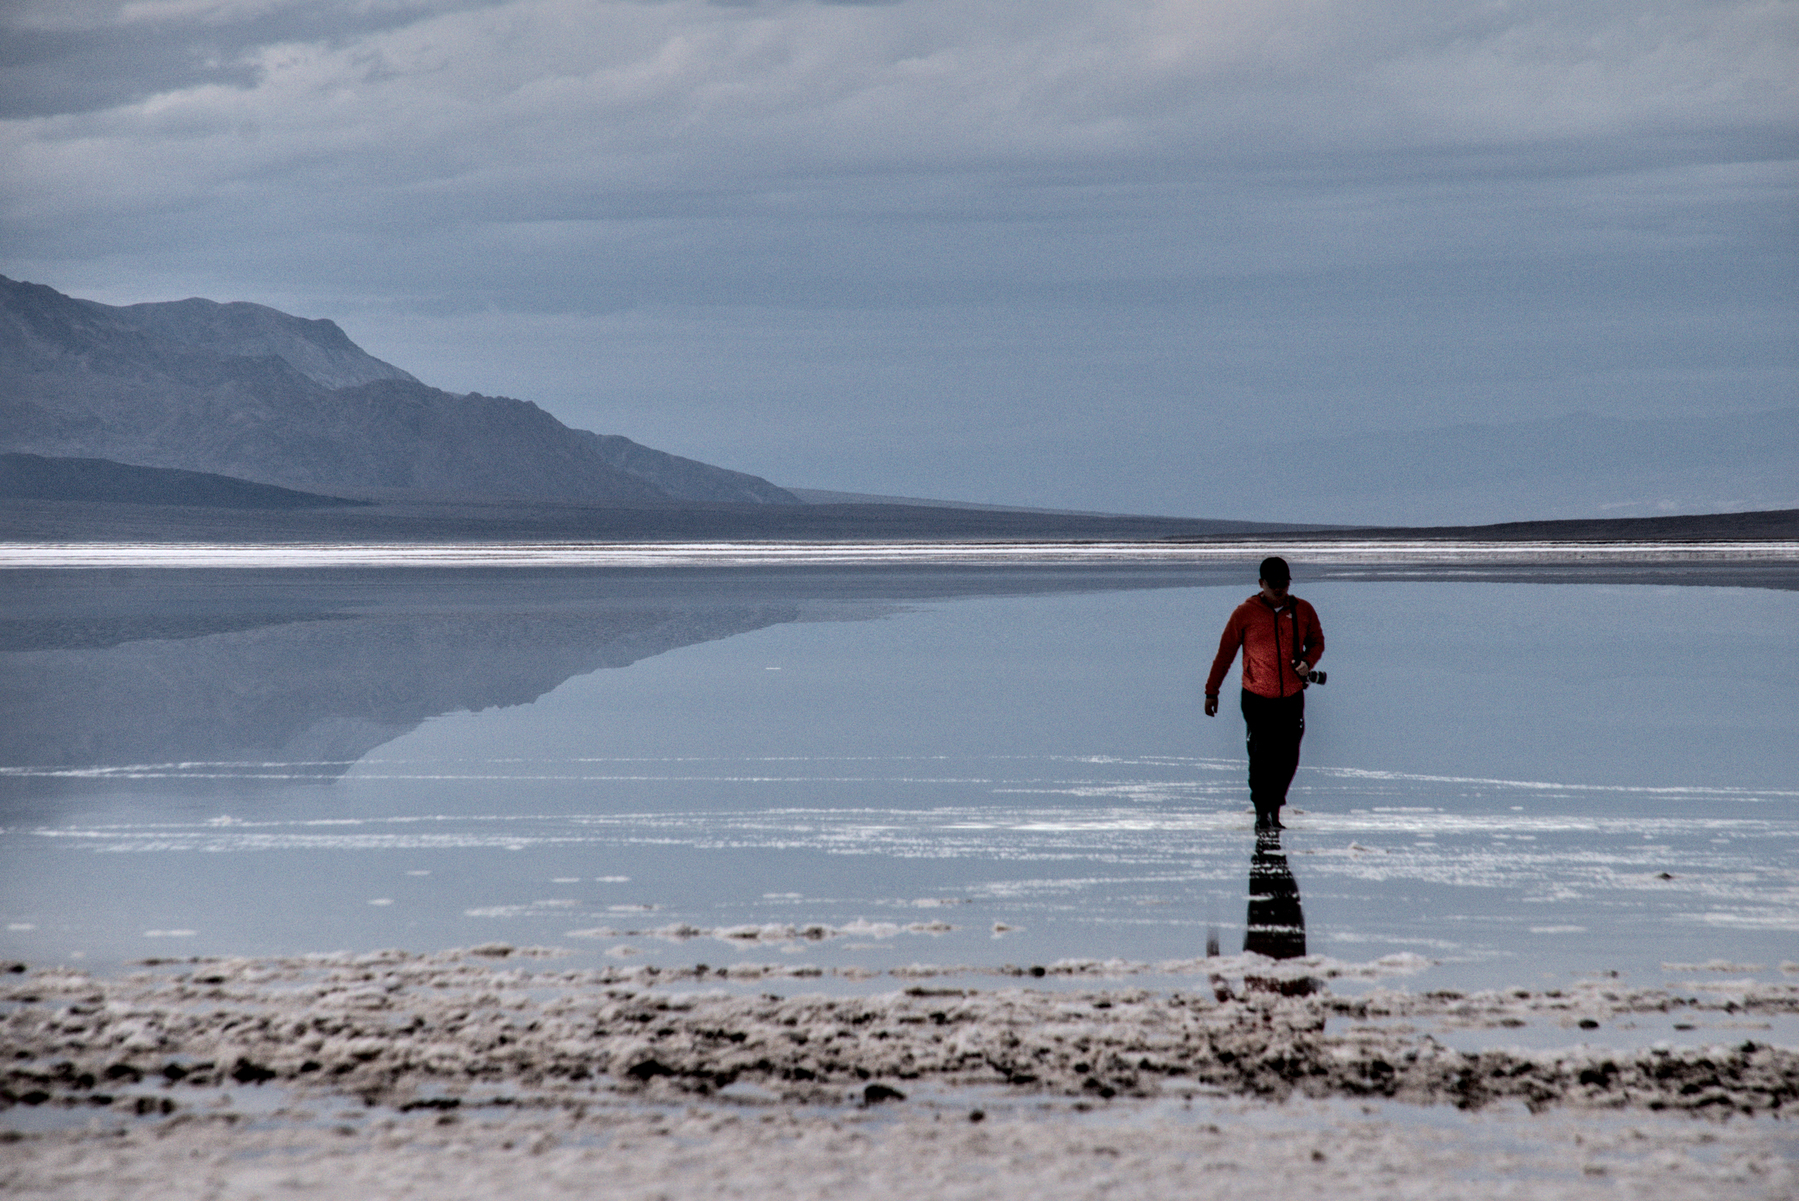 A man appears to walk on the surface of a large lake. The surface is smooth, reflecting the mountains in the distance.